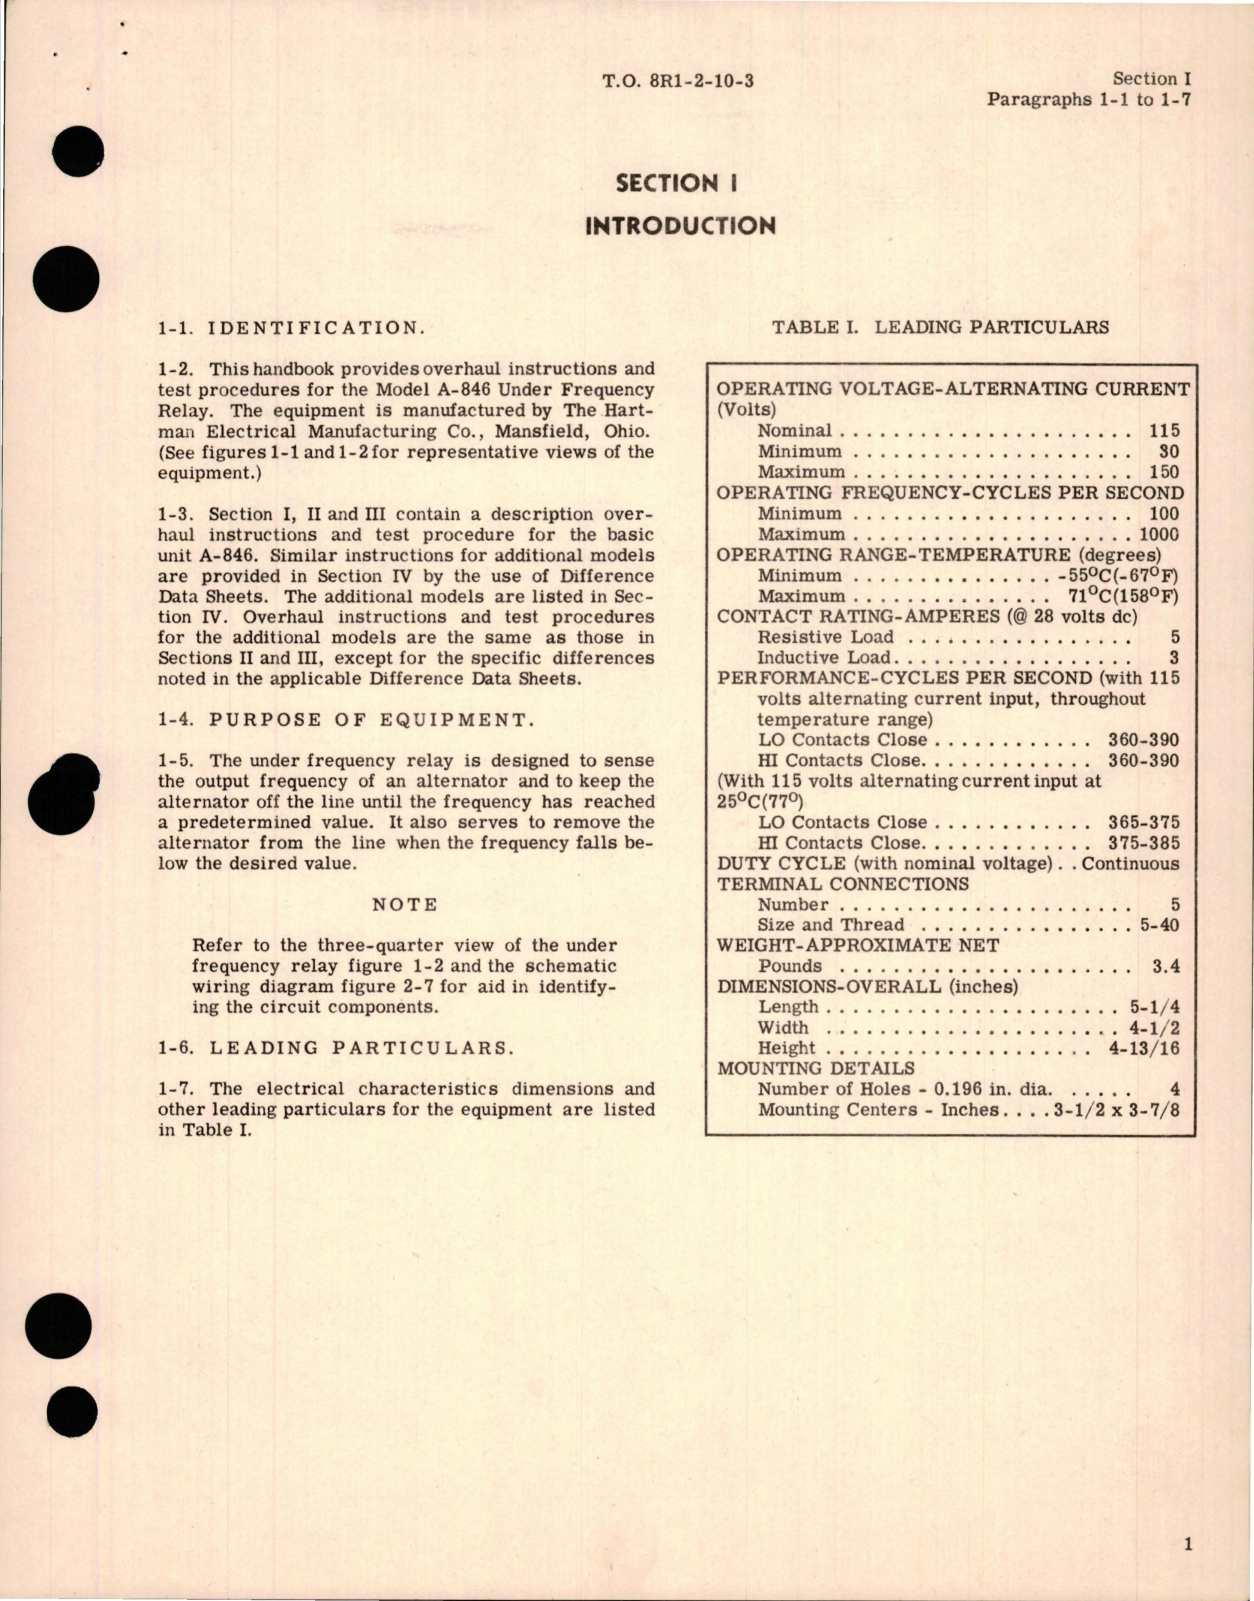 Sample page 5 from AirCorps Library document: Overhaul Manual for Frequency Relay